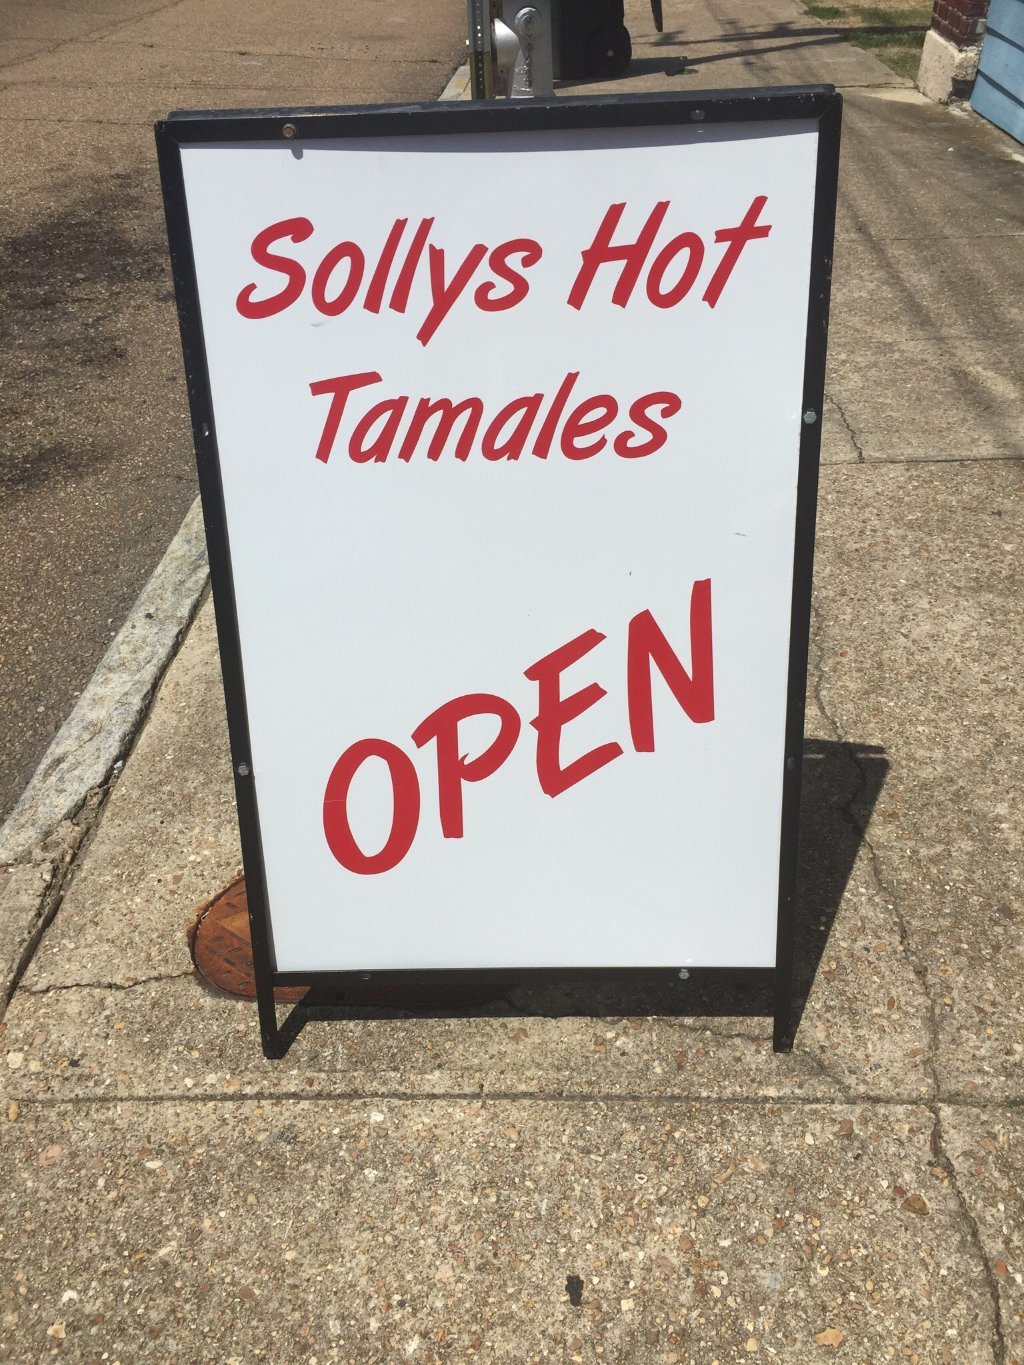 Solly`s Tamales